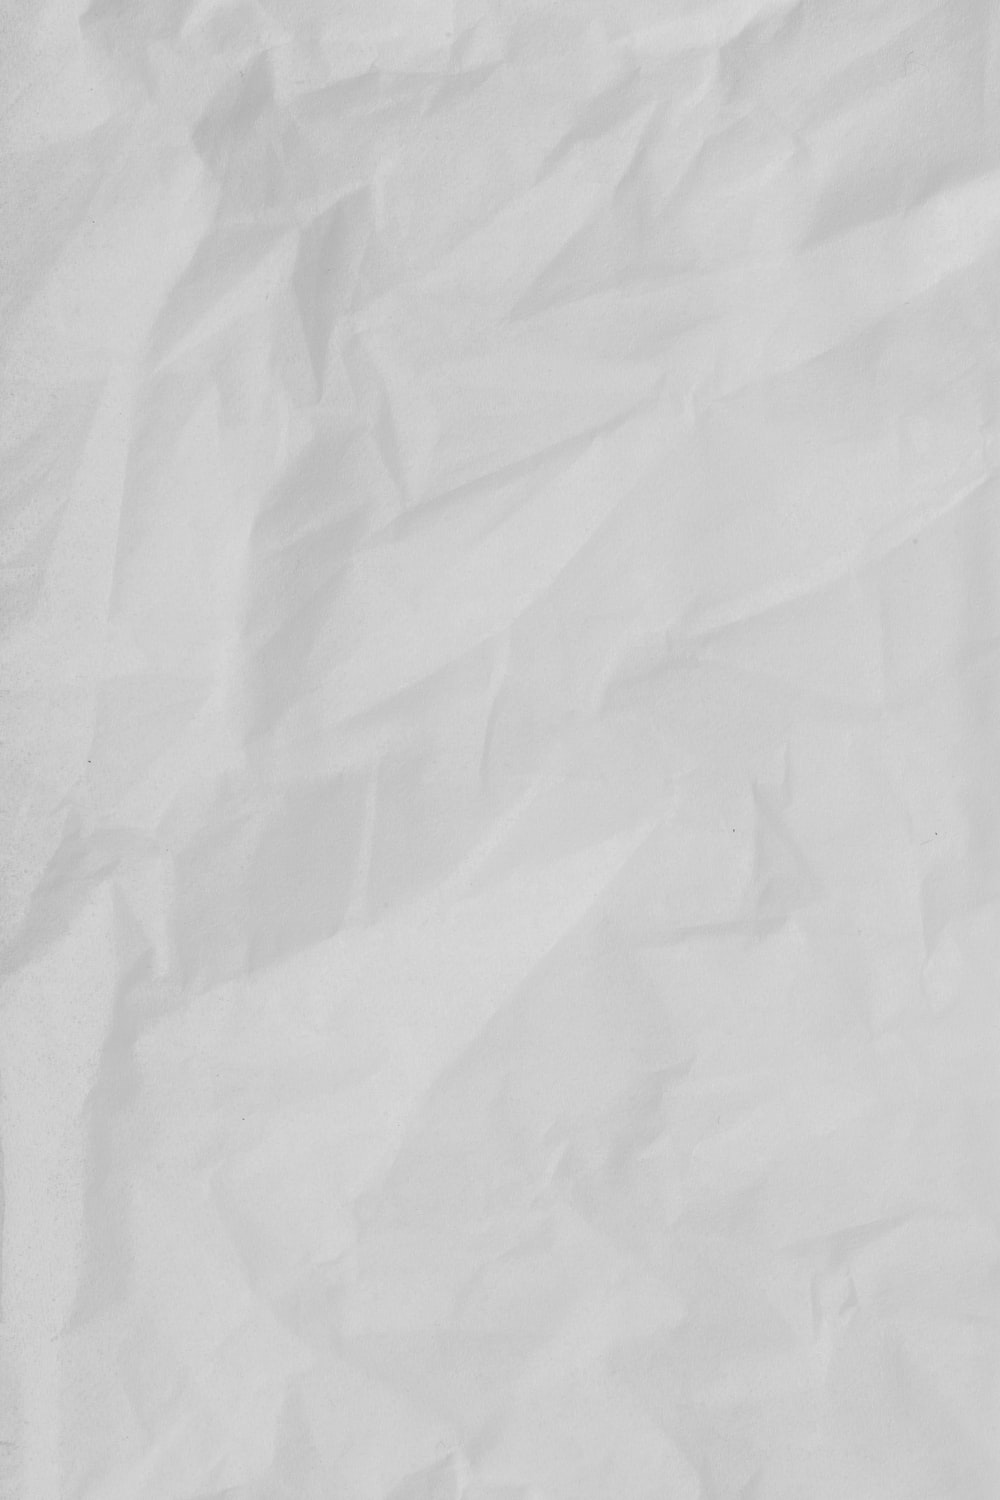 500 Paper Texture Pictures [HD] Download Free Images on